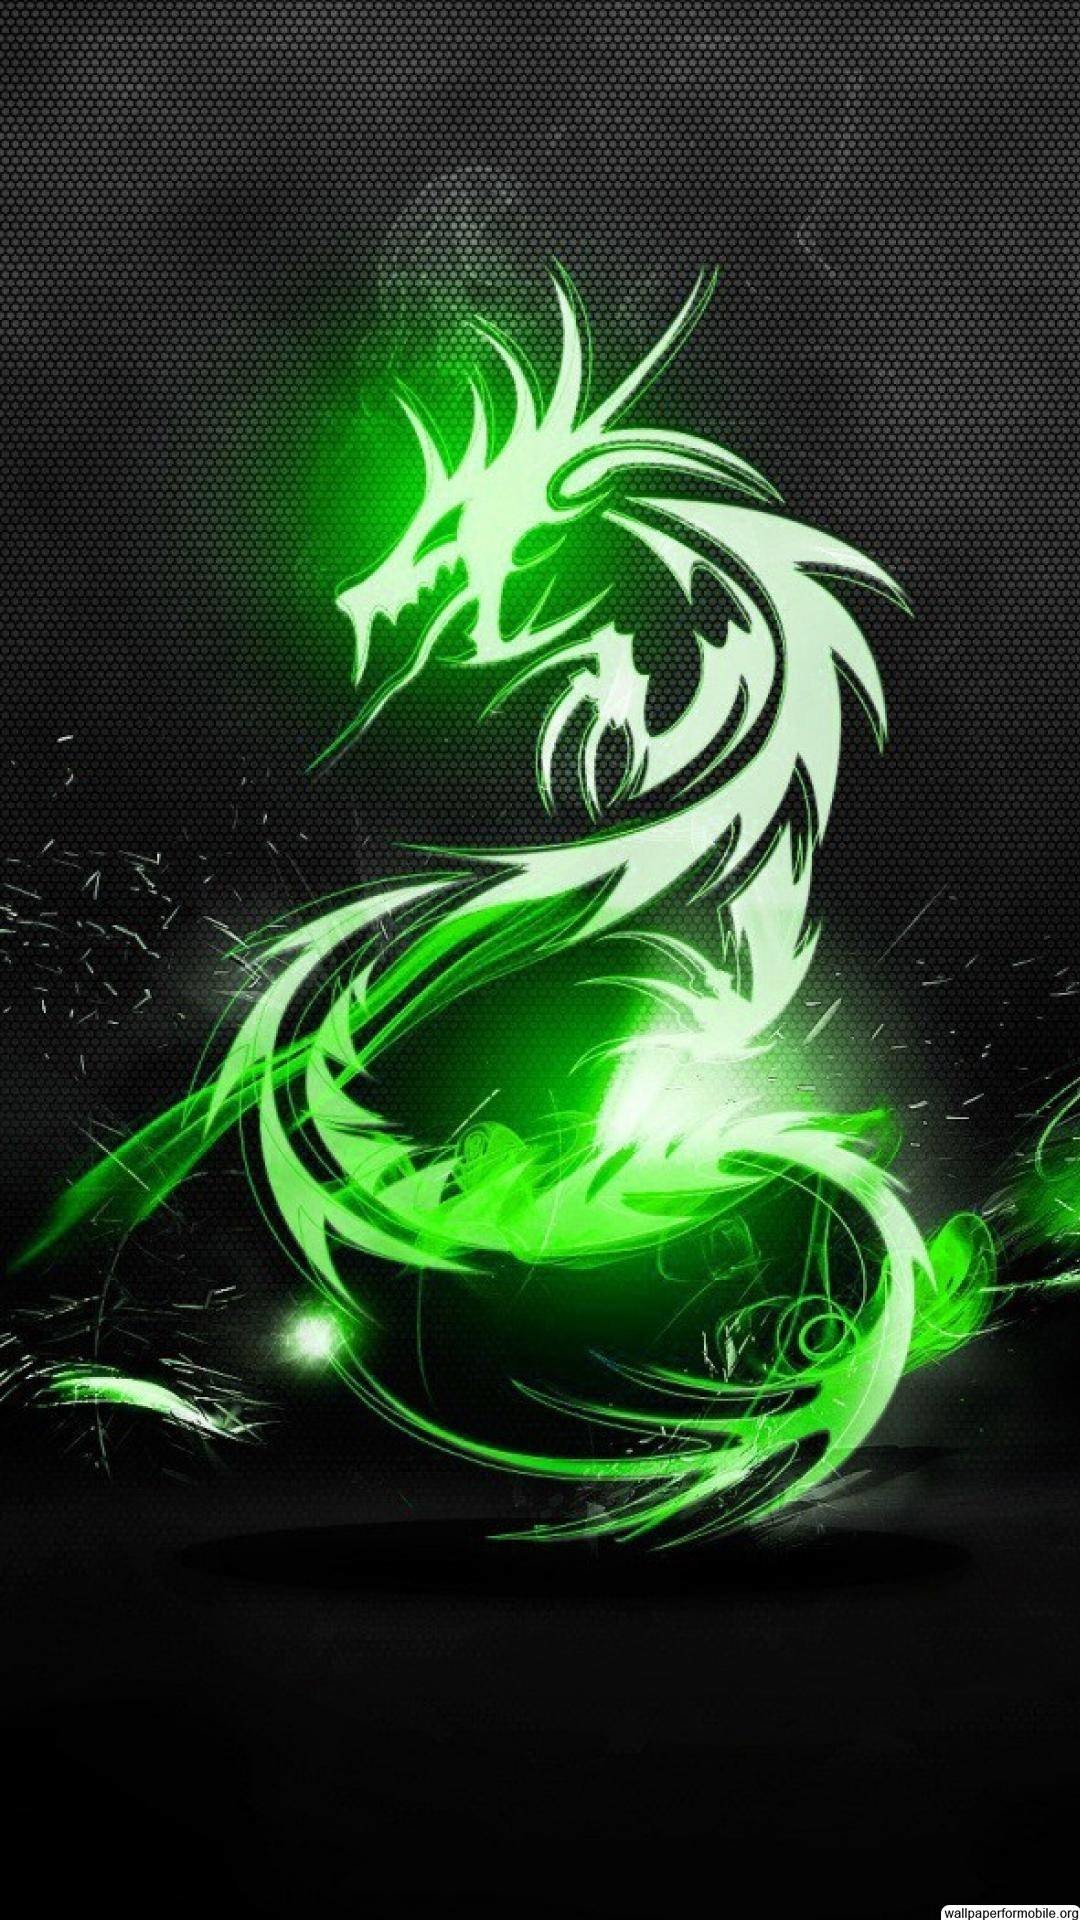 1080x1920 Wallpapers For > Dragon Backgrounds Hd